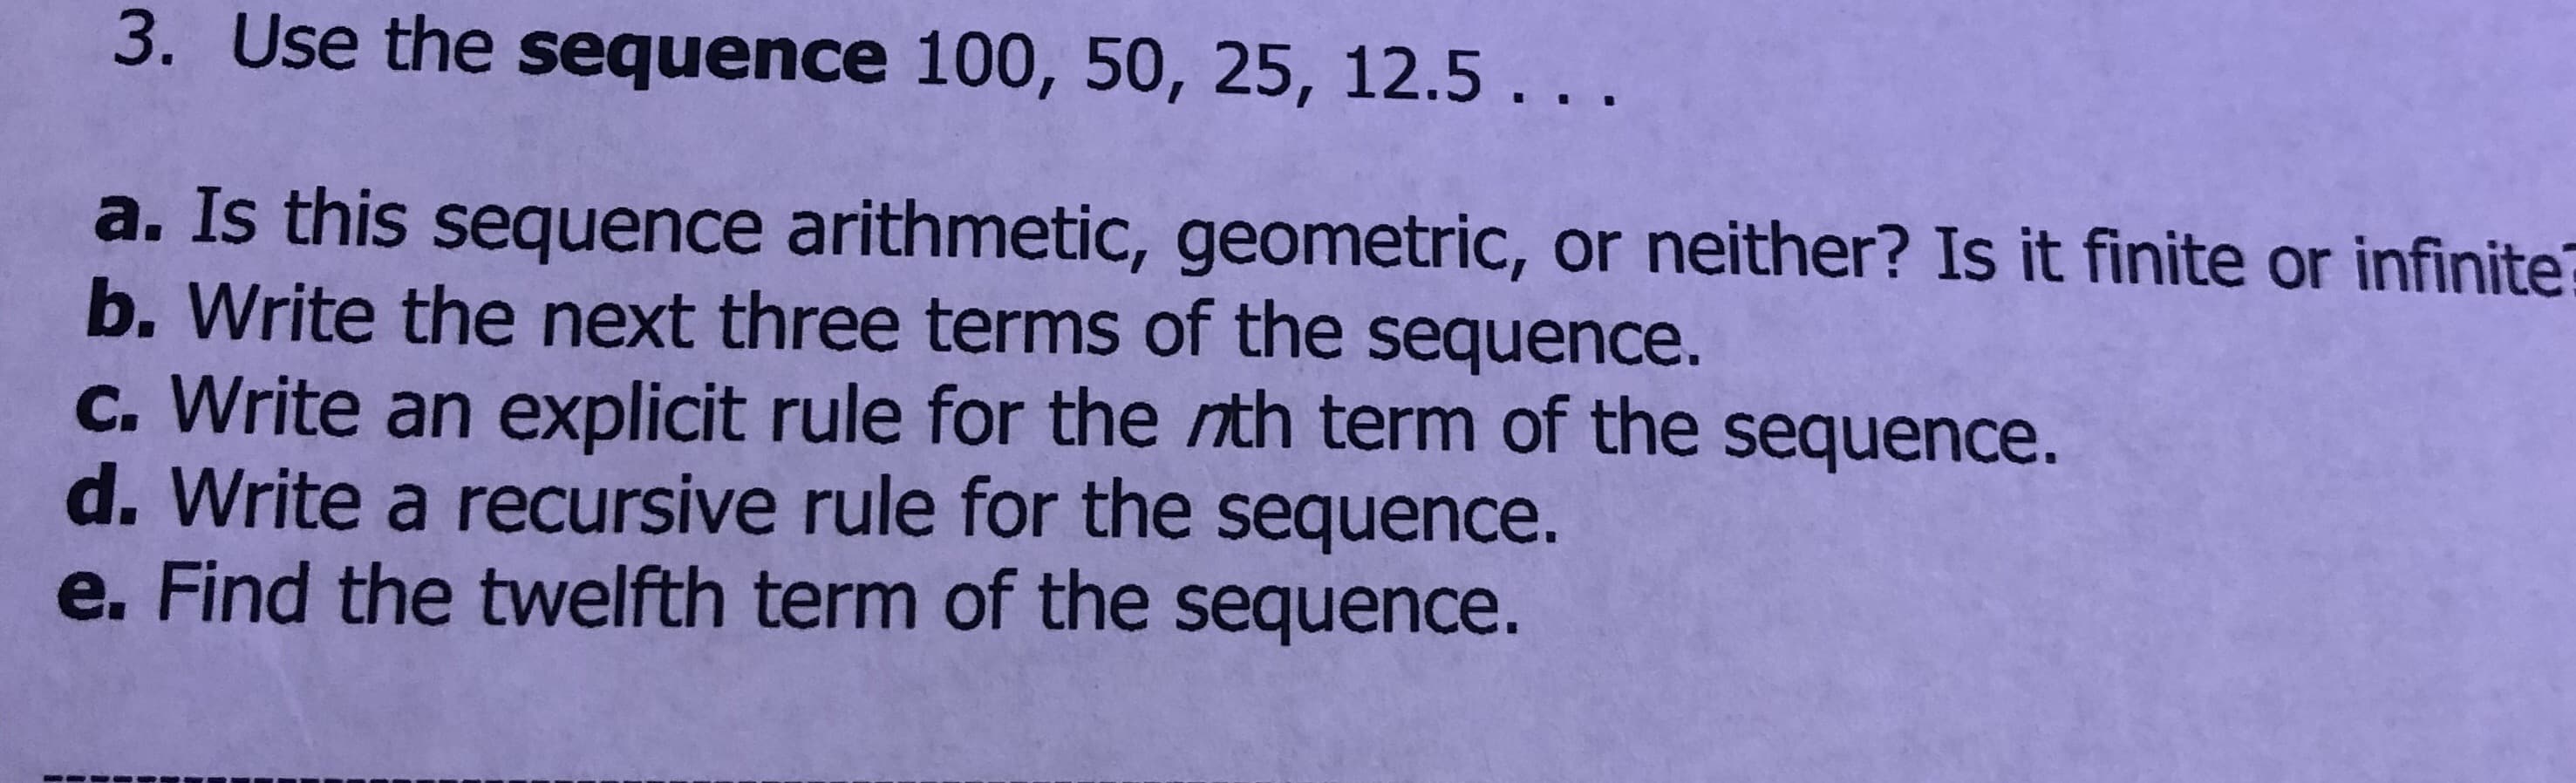 3. Use the sequence 100, 50, 25, 12.5...
a. Is this sequence arithmetic, geometric, or neither? Is it finite or infinite
b. Write the next three terms of the sequence.
c. Write an explicit rule for the nth term of the sequence.
d. Write a recursive rule for the sequence.
e. Find the twelfth term of the sequence.
